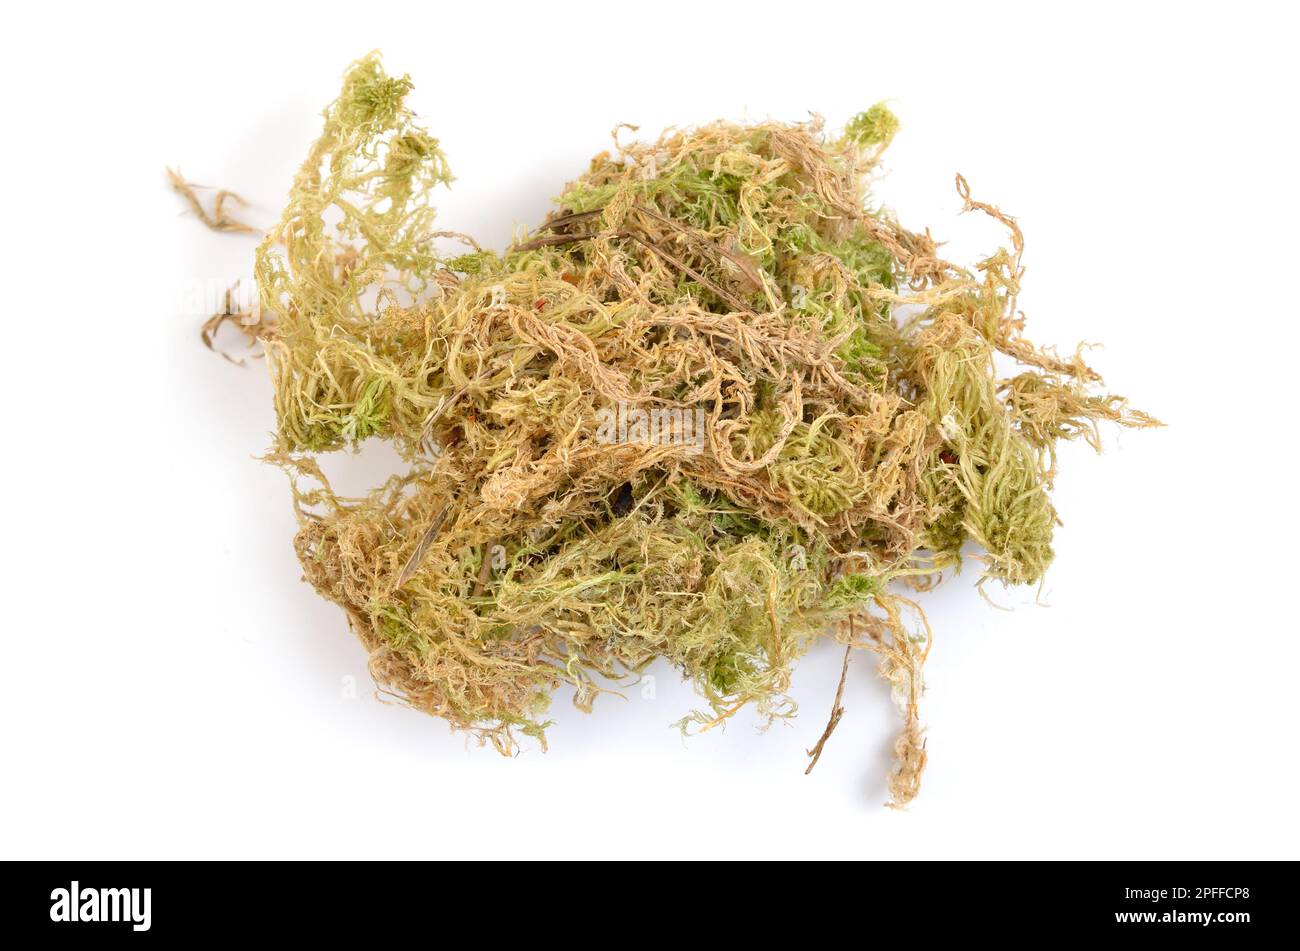 B/A Sphagnum Moss for Orchids - Green Dry Sphagnum Moss, Dried Water Moss